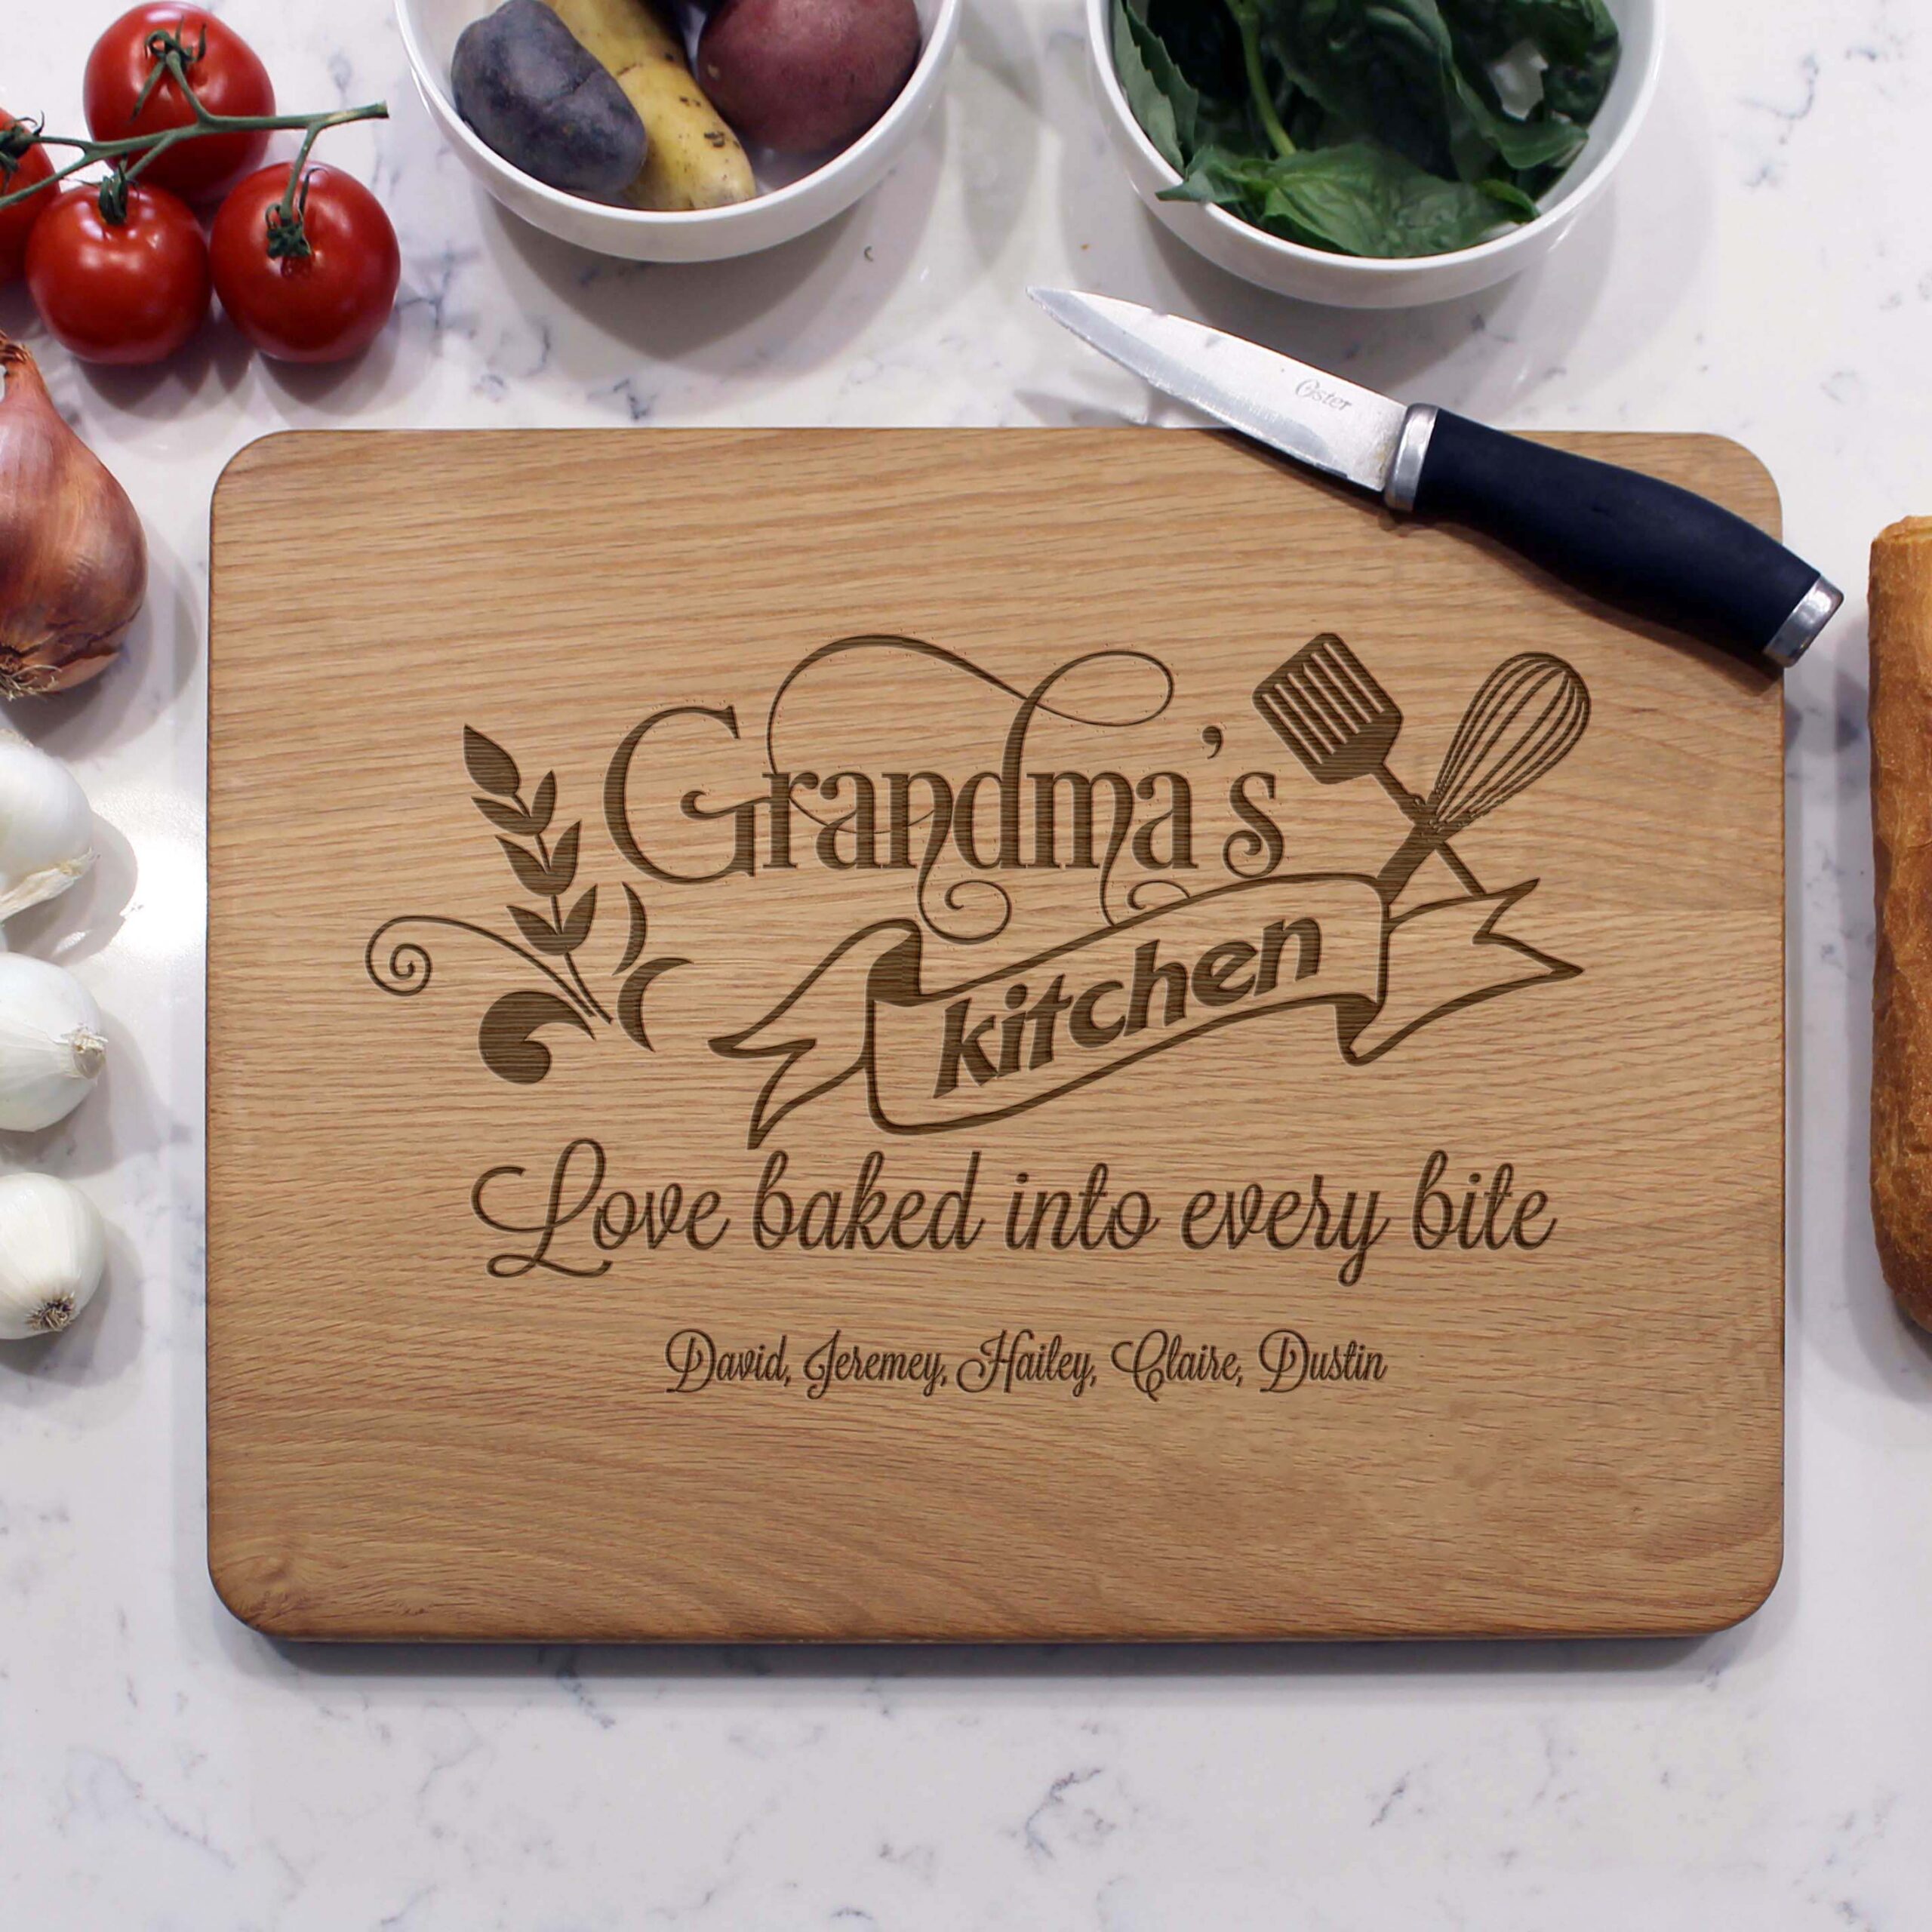 Custom Cutting Board for Grandma's Kitchen, Mom's Kitchen, or other  Personalized Name